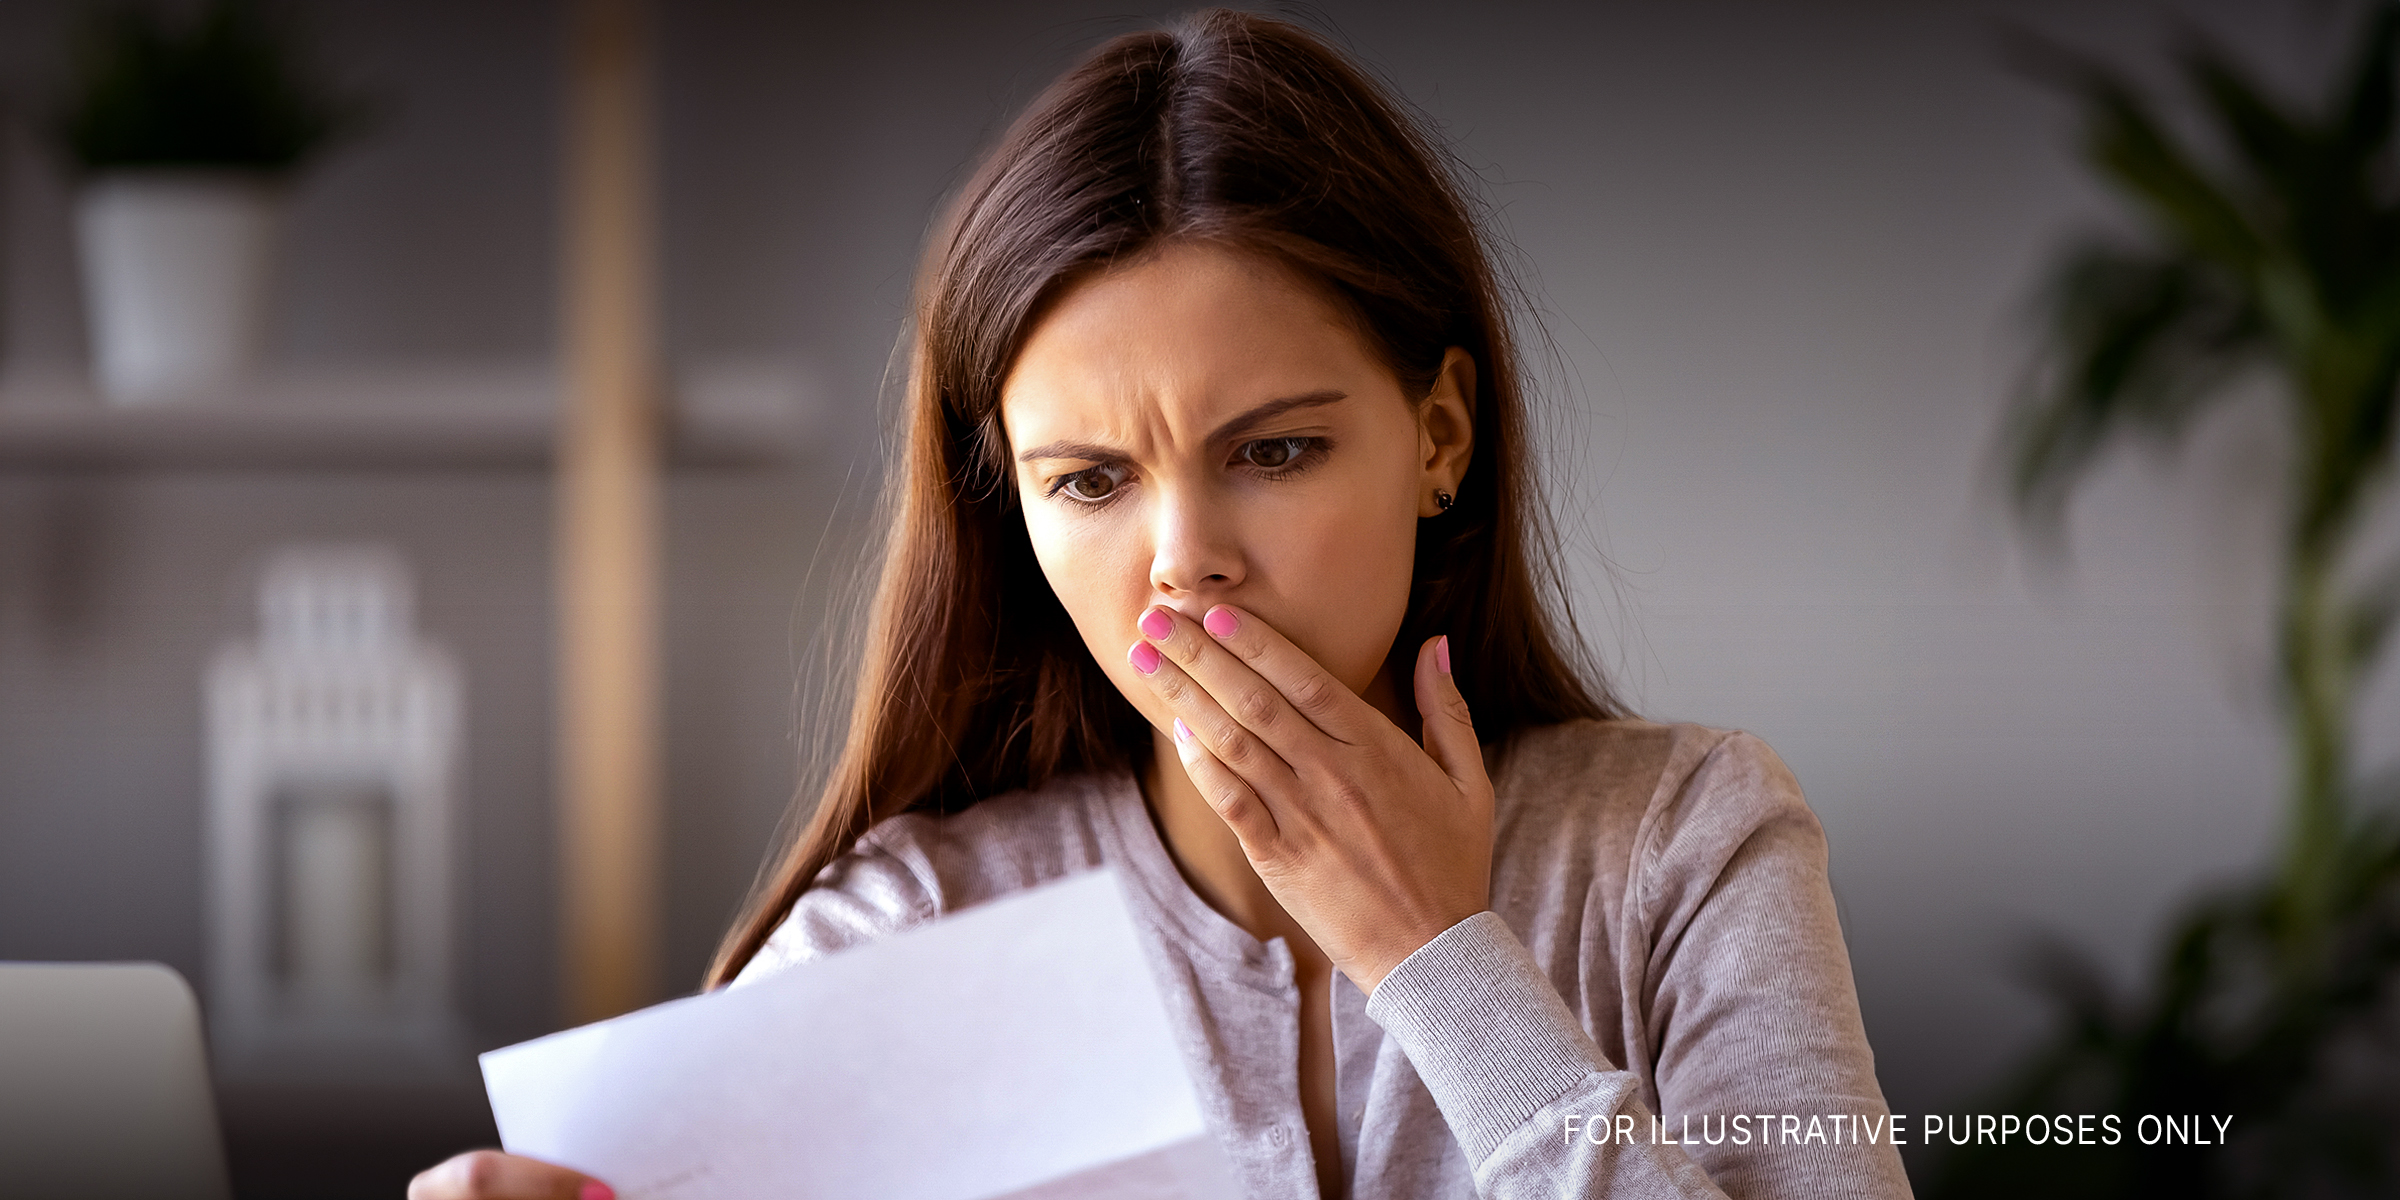 A shocked woman looking at a letter | Source: Shutterstock